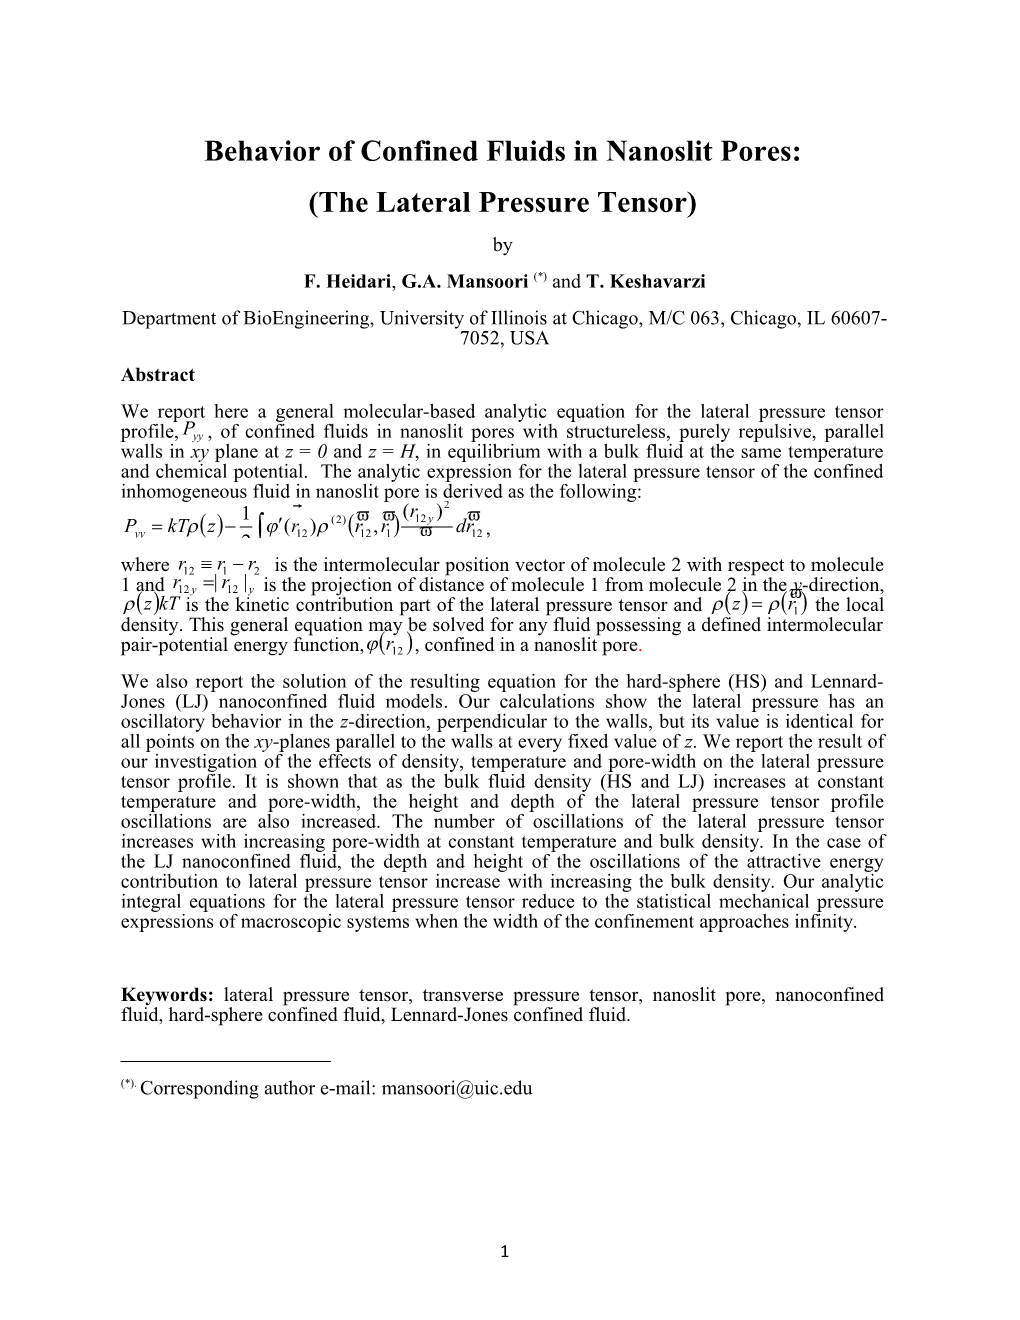 The Lateral Pressure Tensor of Confined Fluids